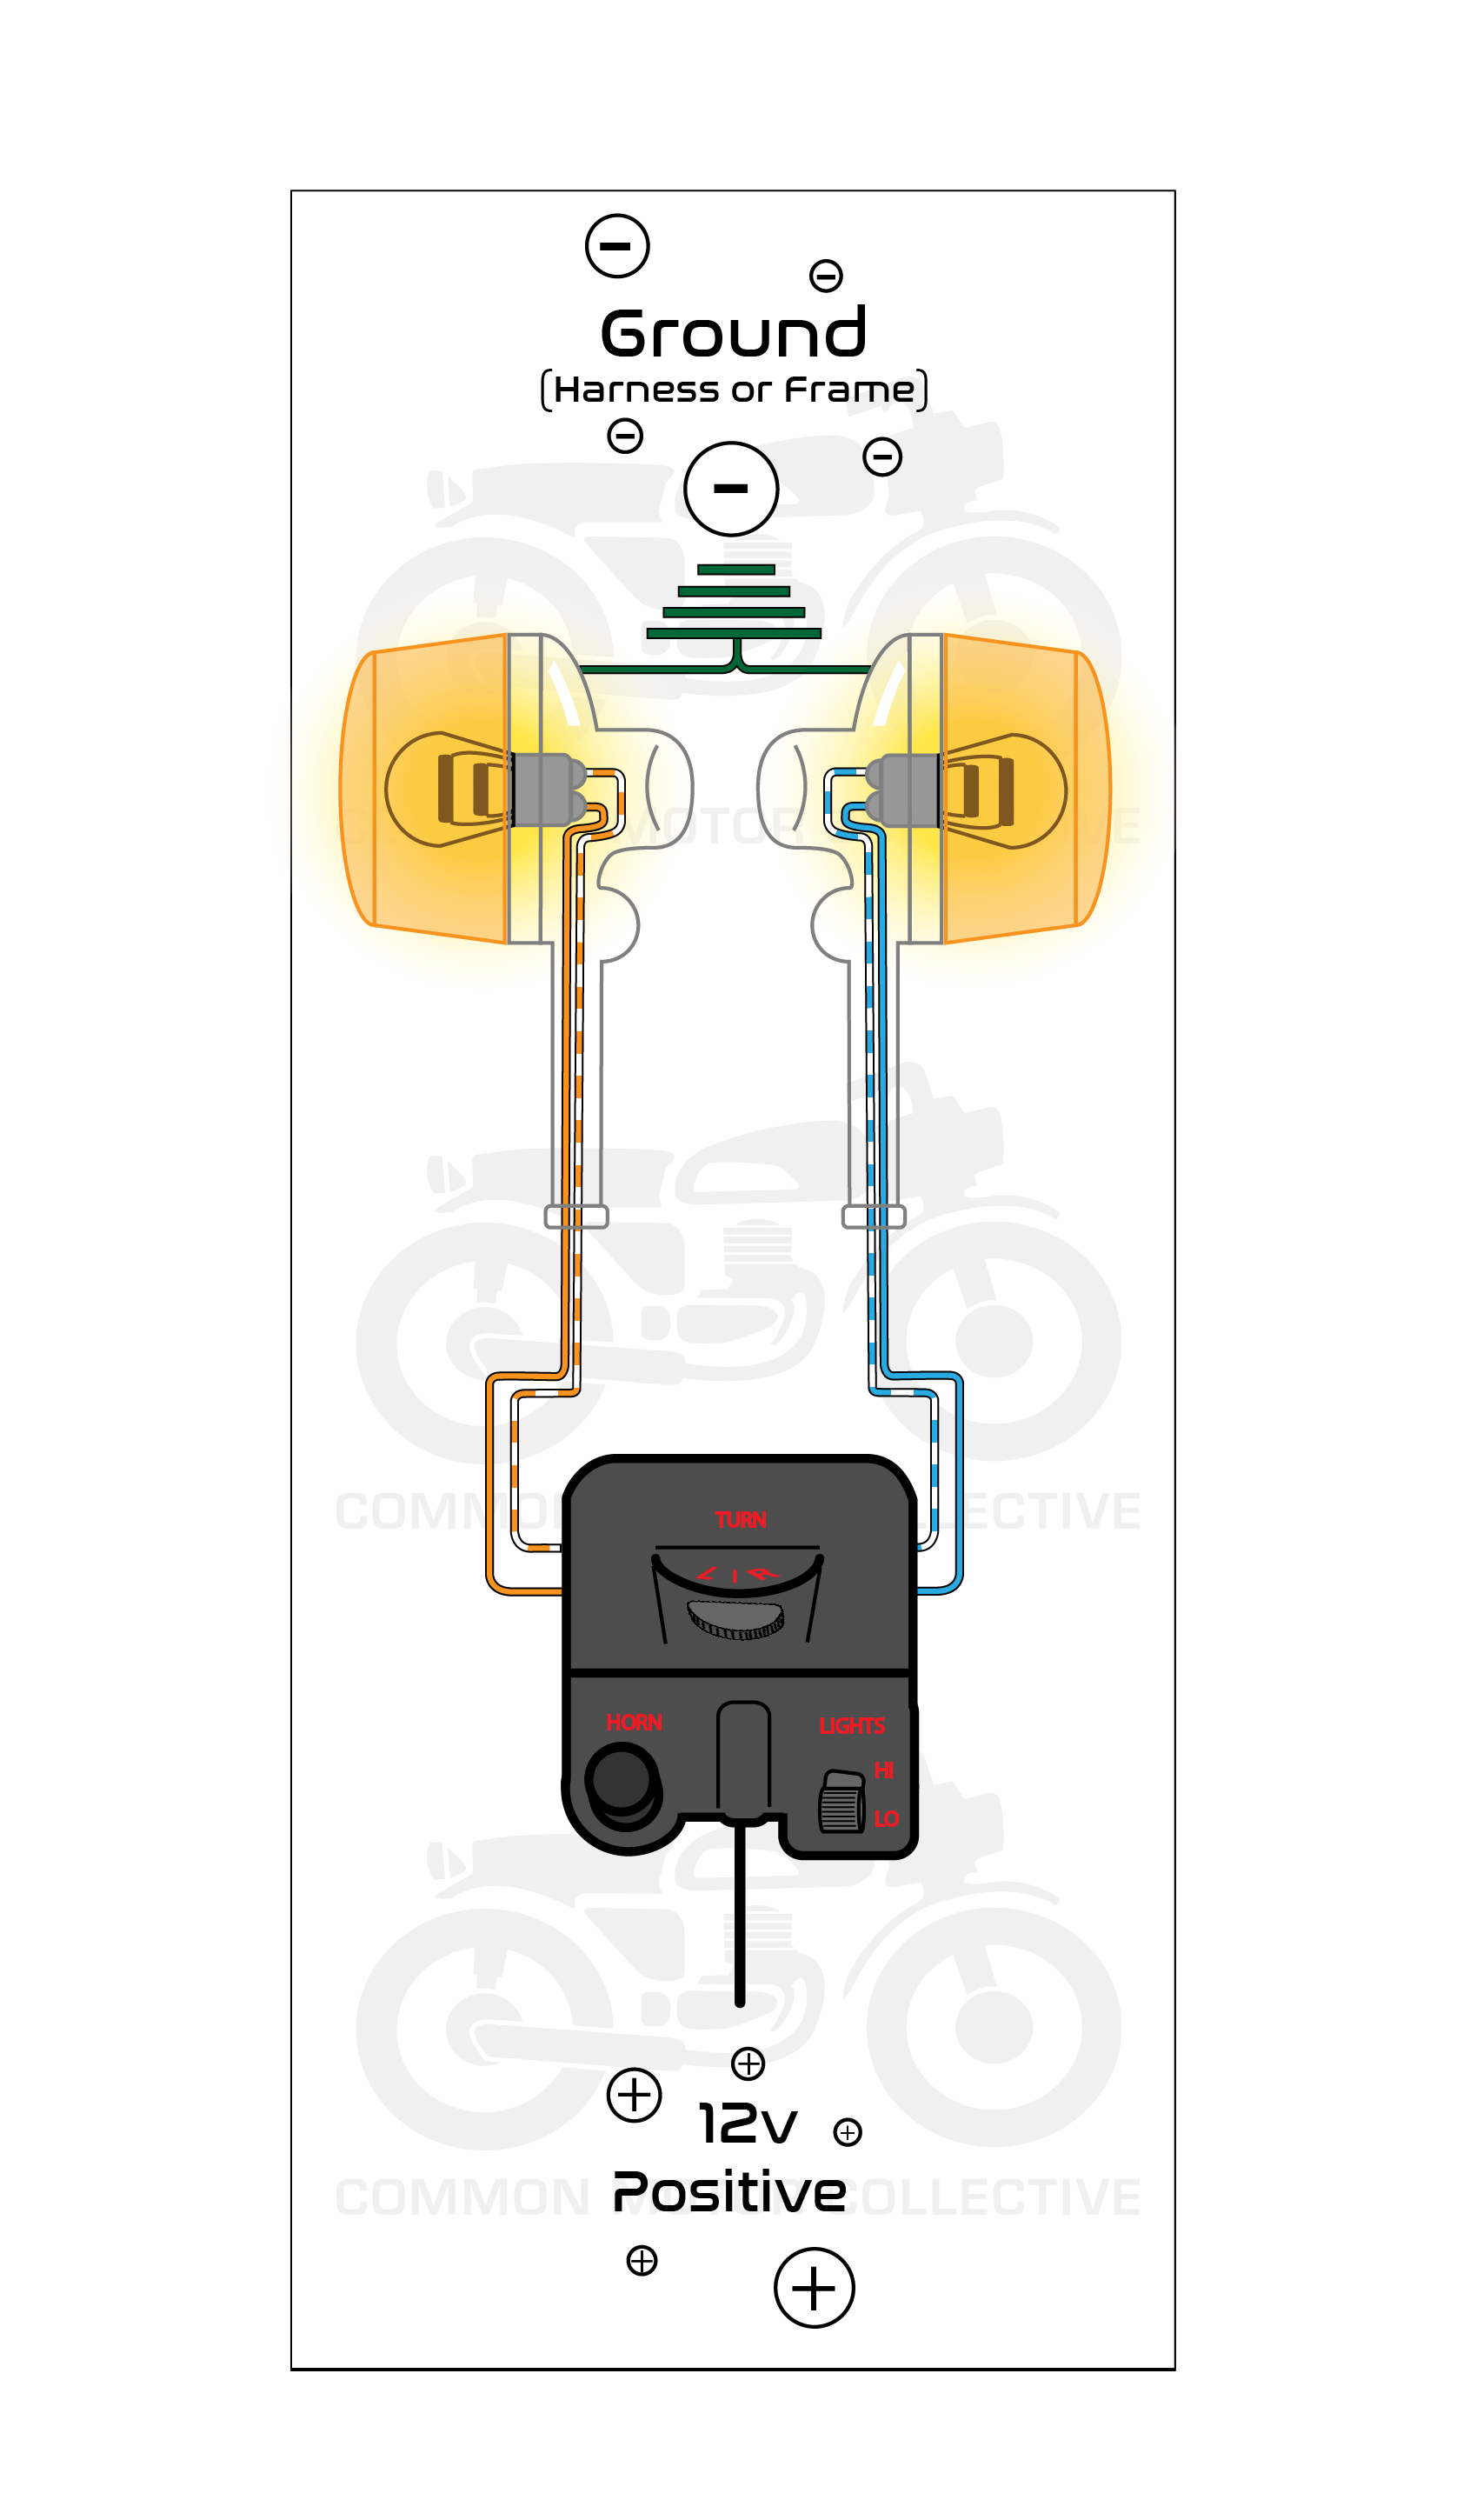 Late Style Running Lights specific simplified wiring diagraham with watermark and lights.png